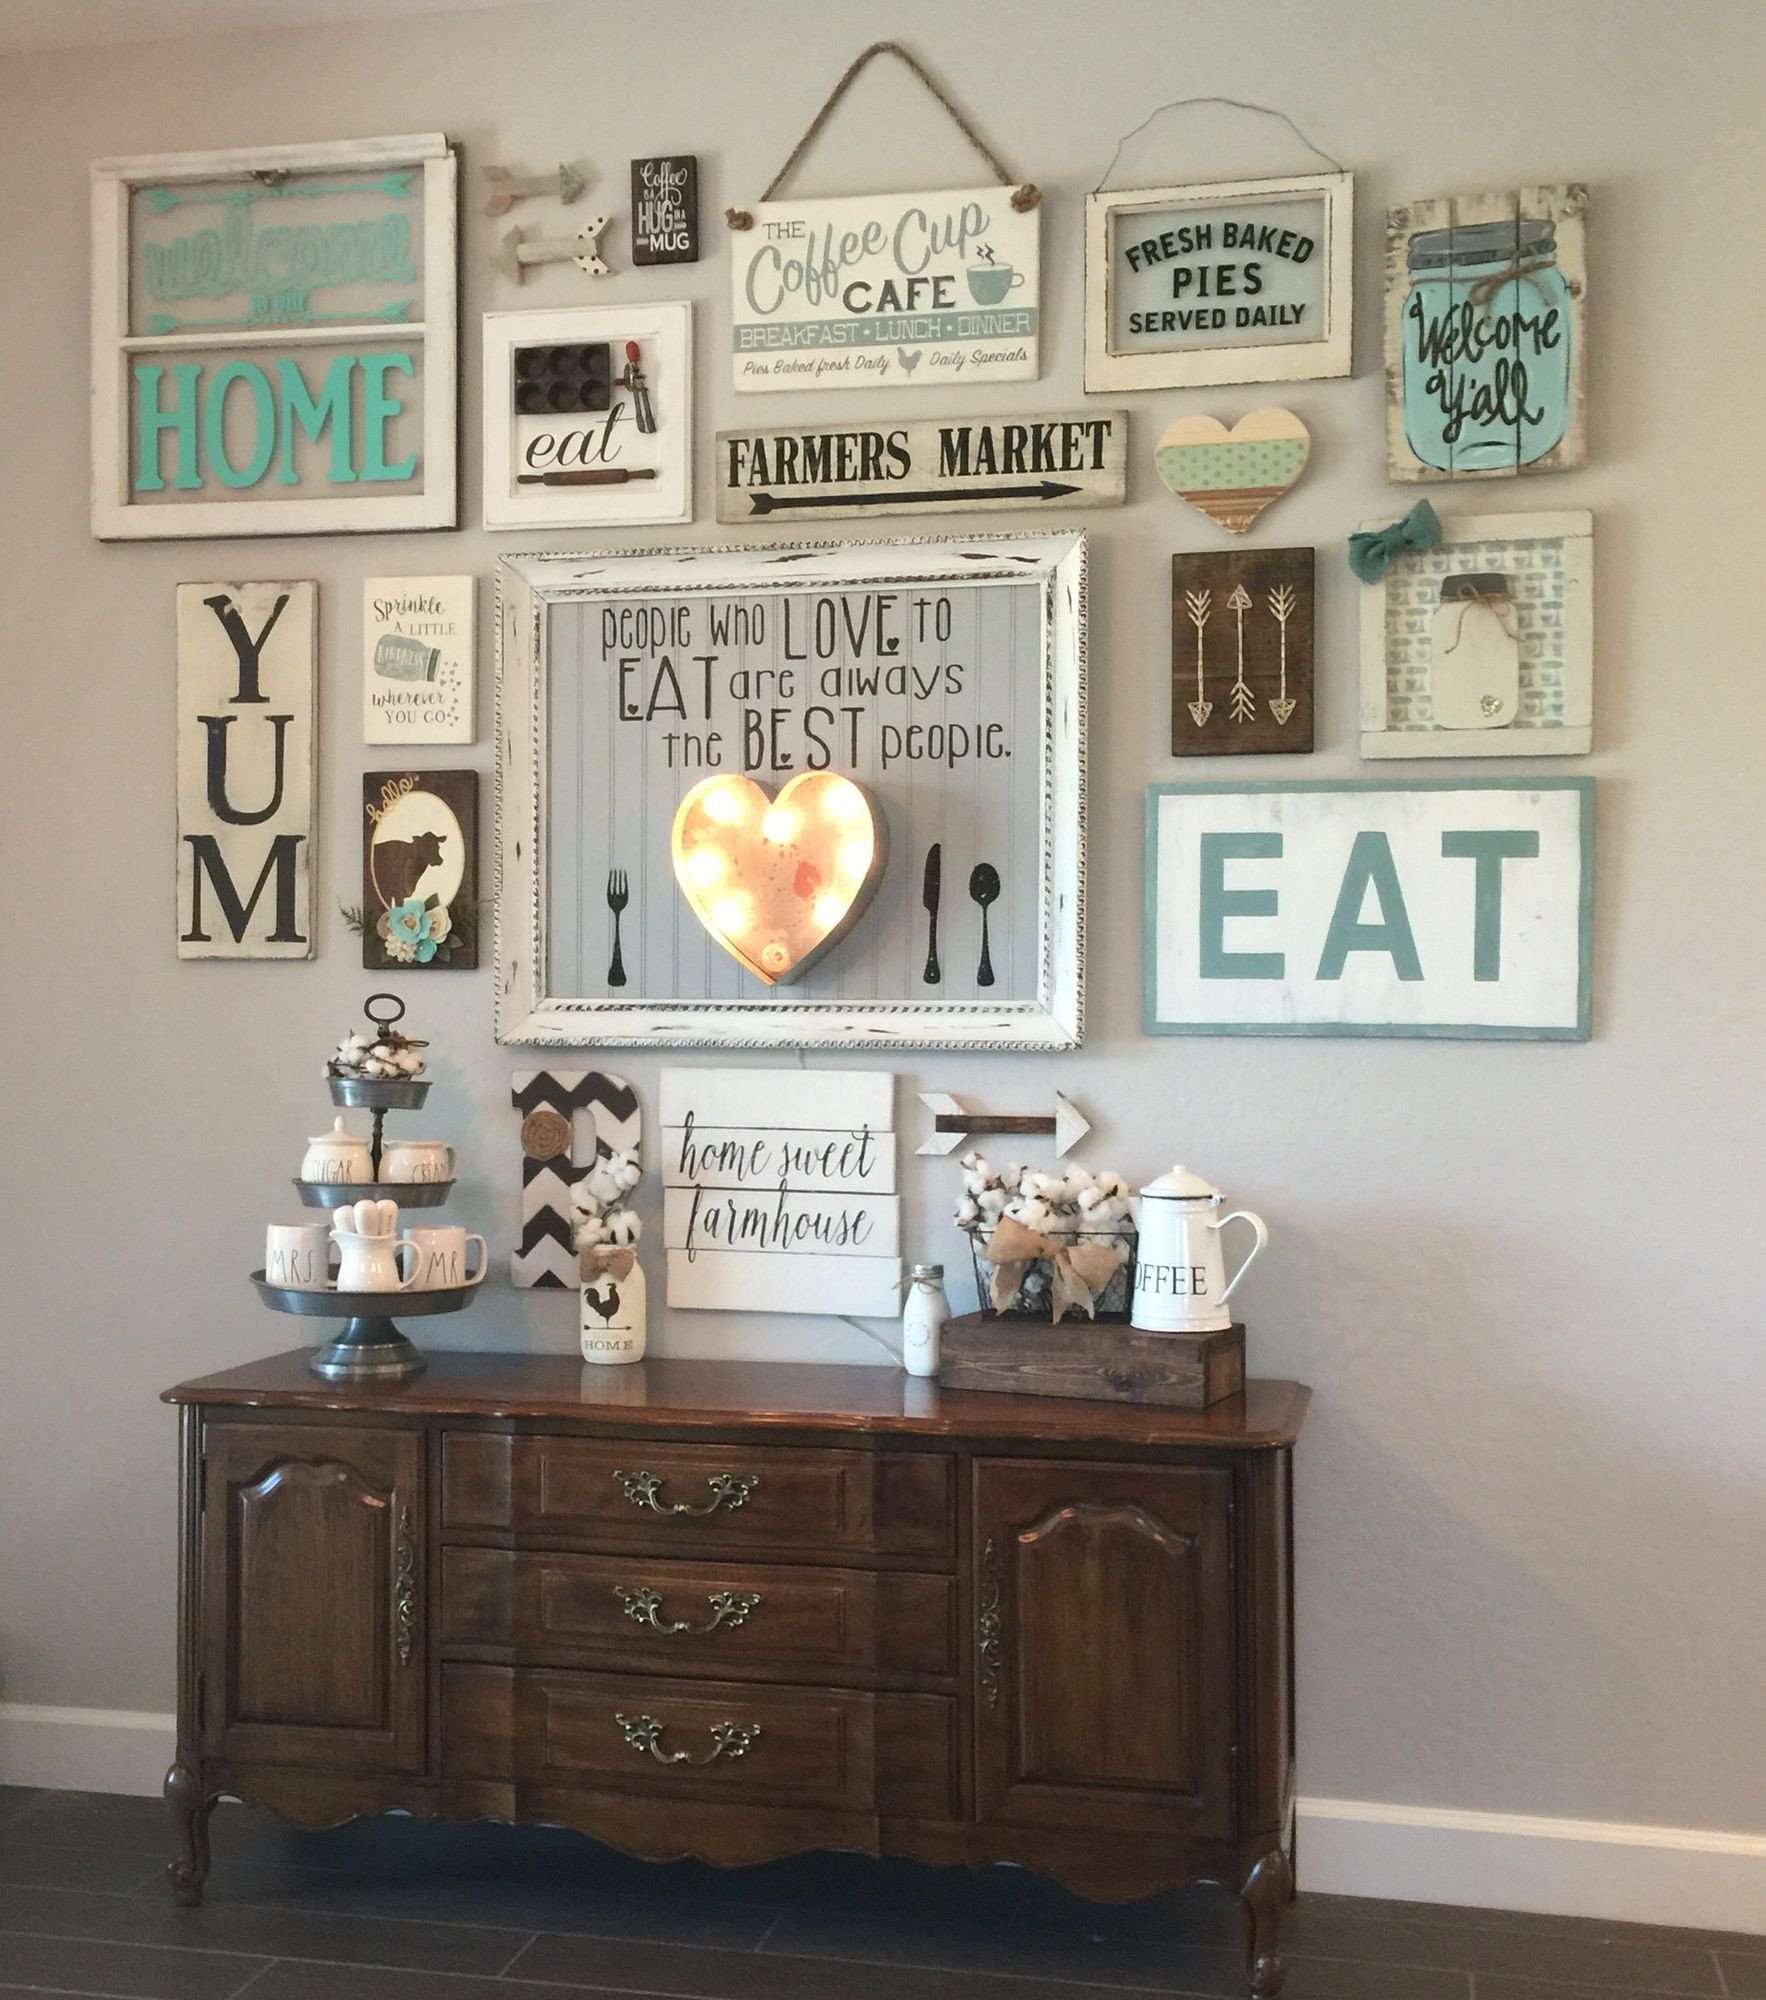 Rustic Kitchen Wall Art
 My gallery wall in our kitchen I m colewifey on IG